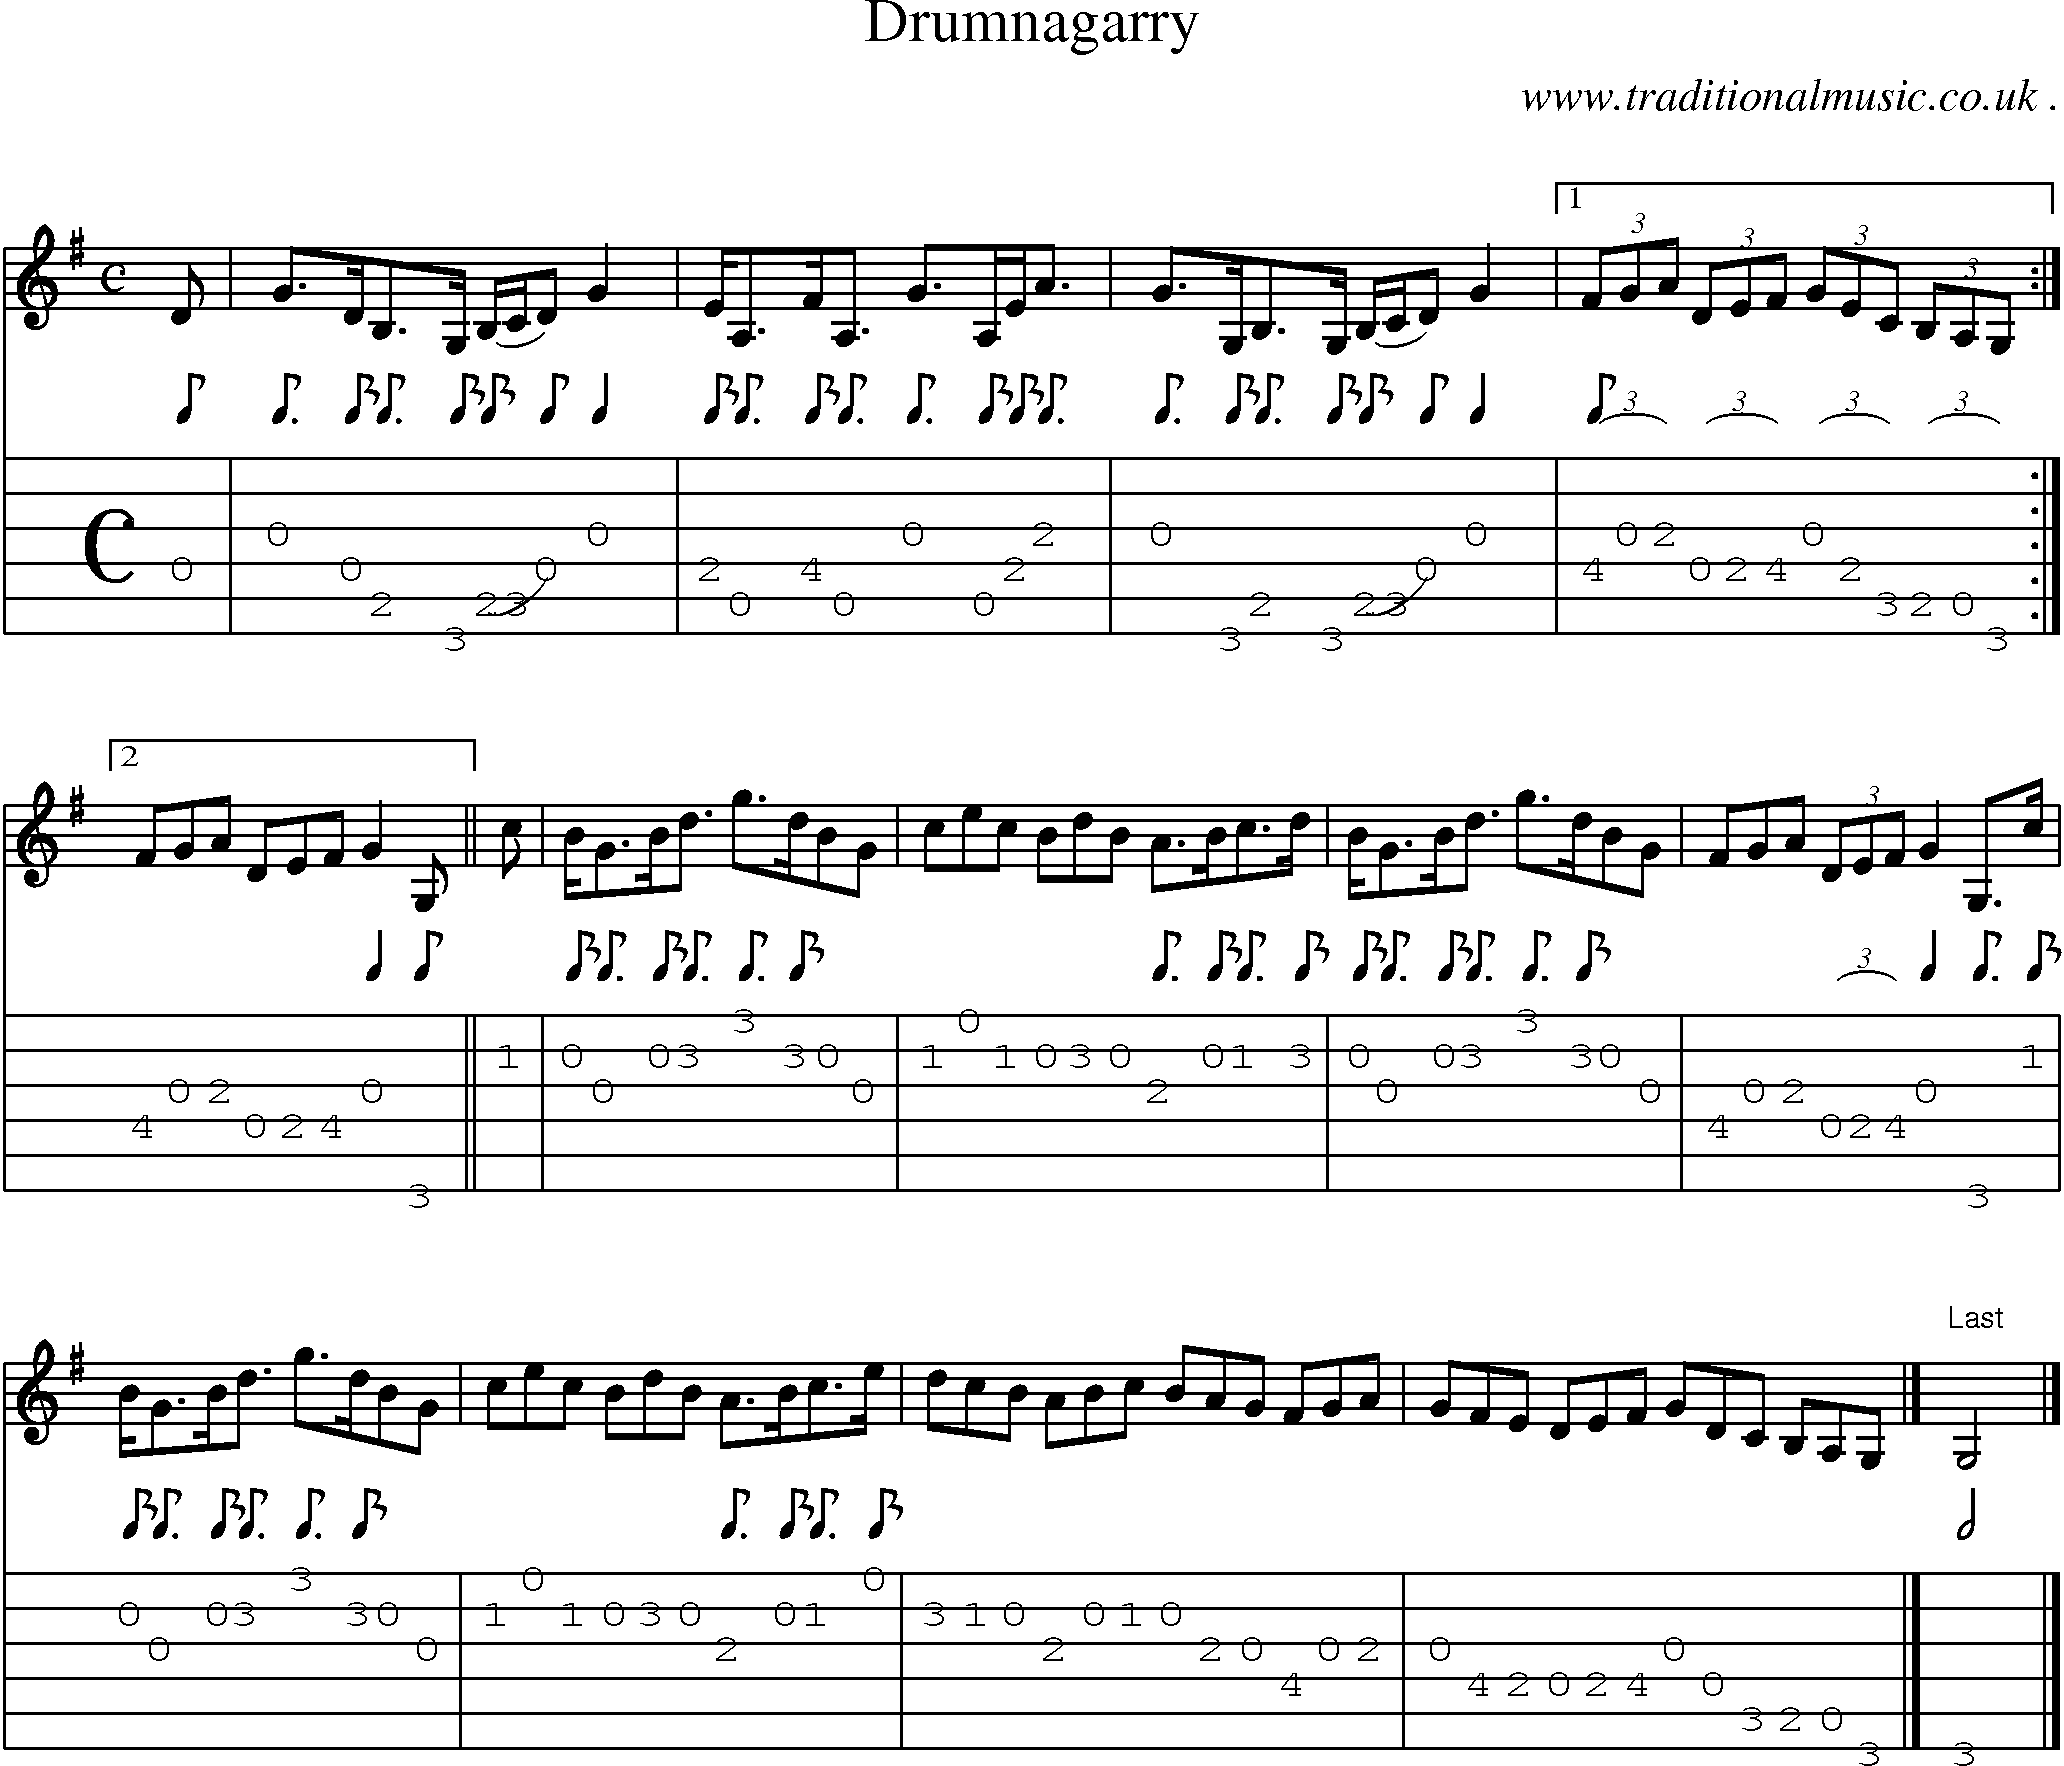 Sheet-music  score, Chords and Guitar Tabs for Drumnagarry